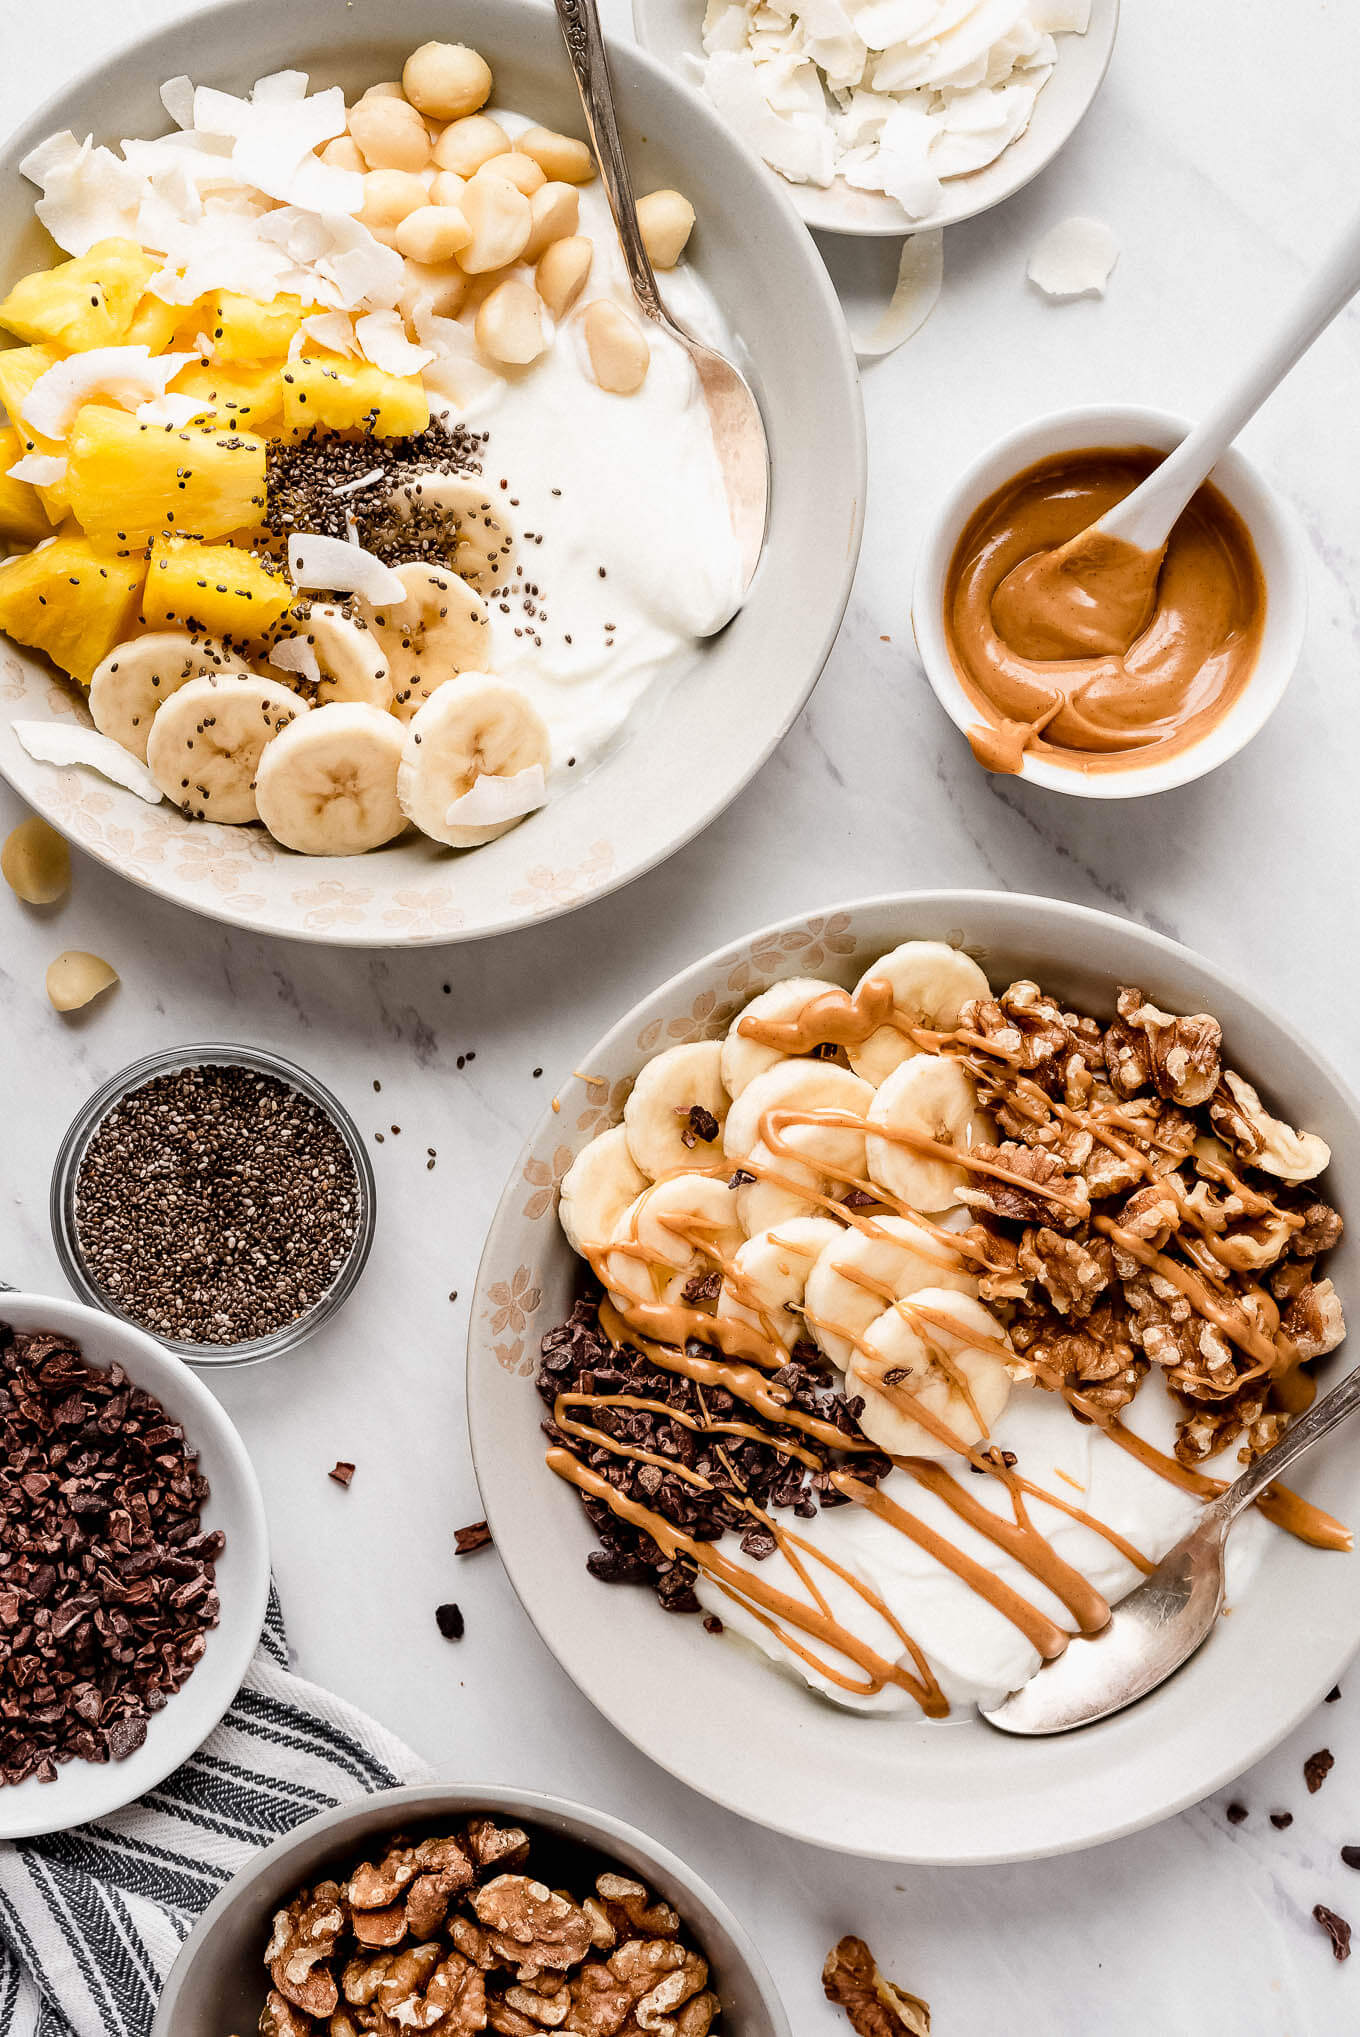 A yogurt bowl with tropical toppings and a yogurt bowl with nuts, bananas, and chocolate.